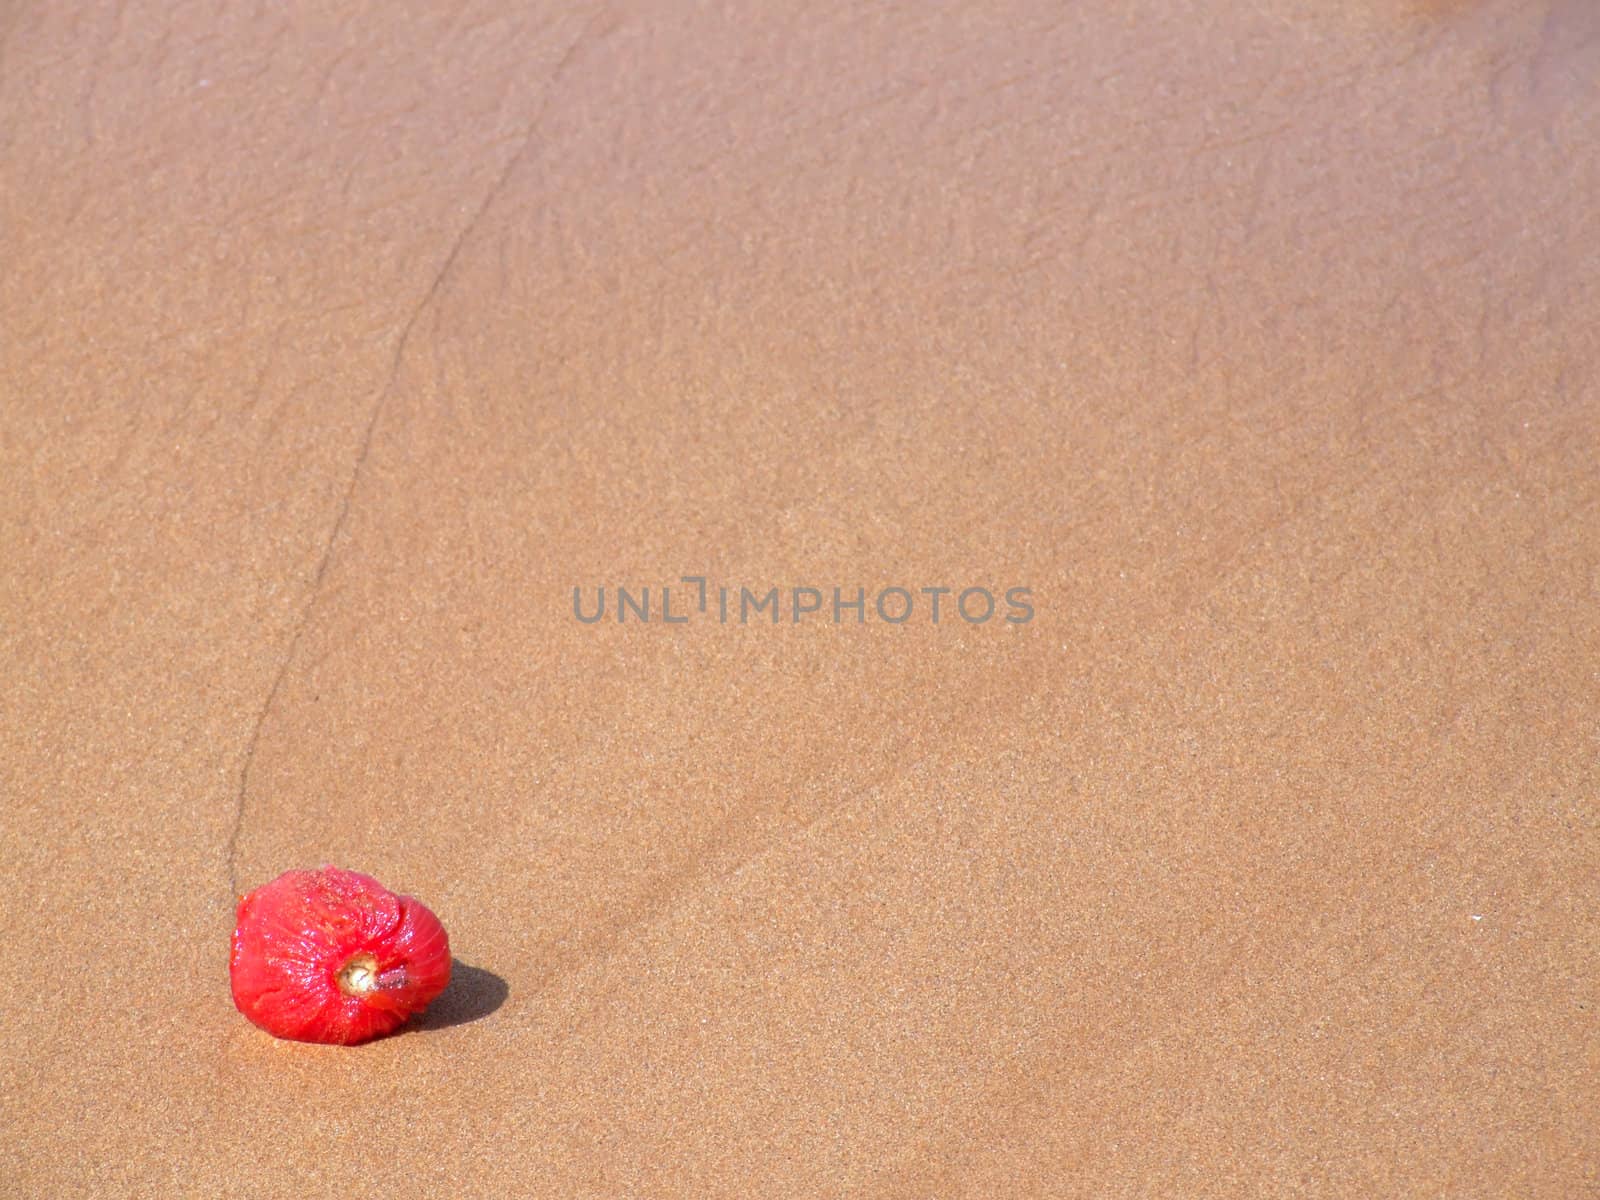 Wrinkled and dried tomato an a sandy beach